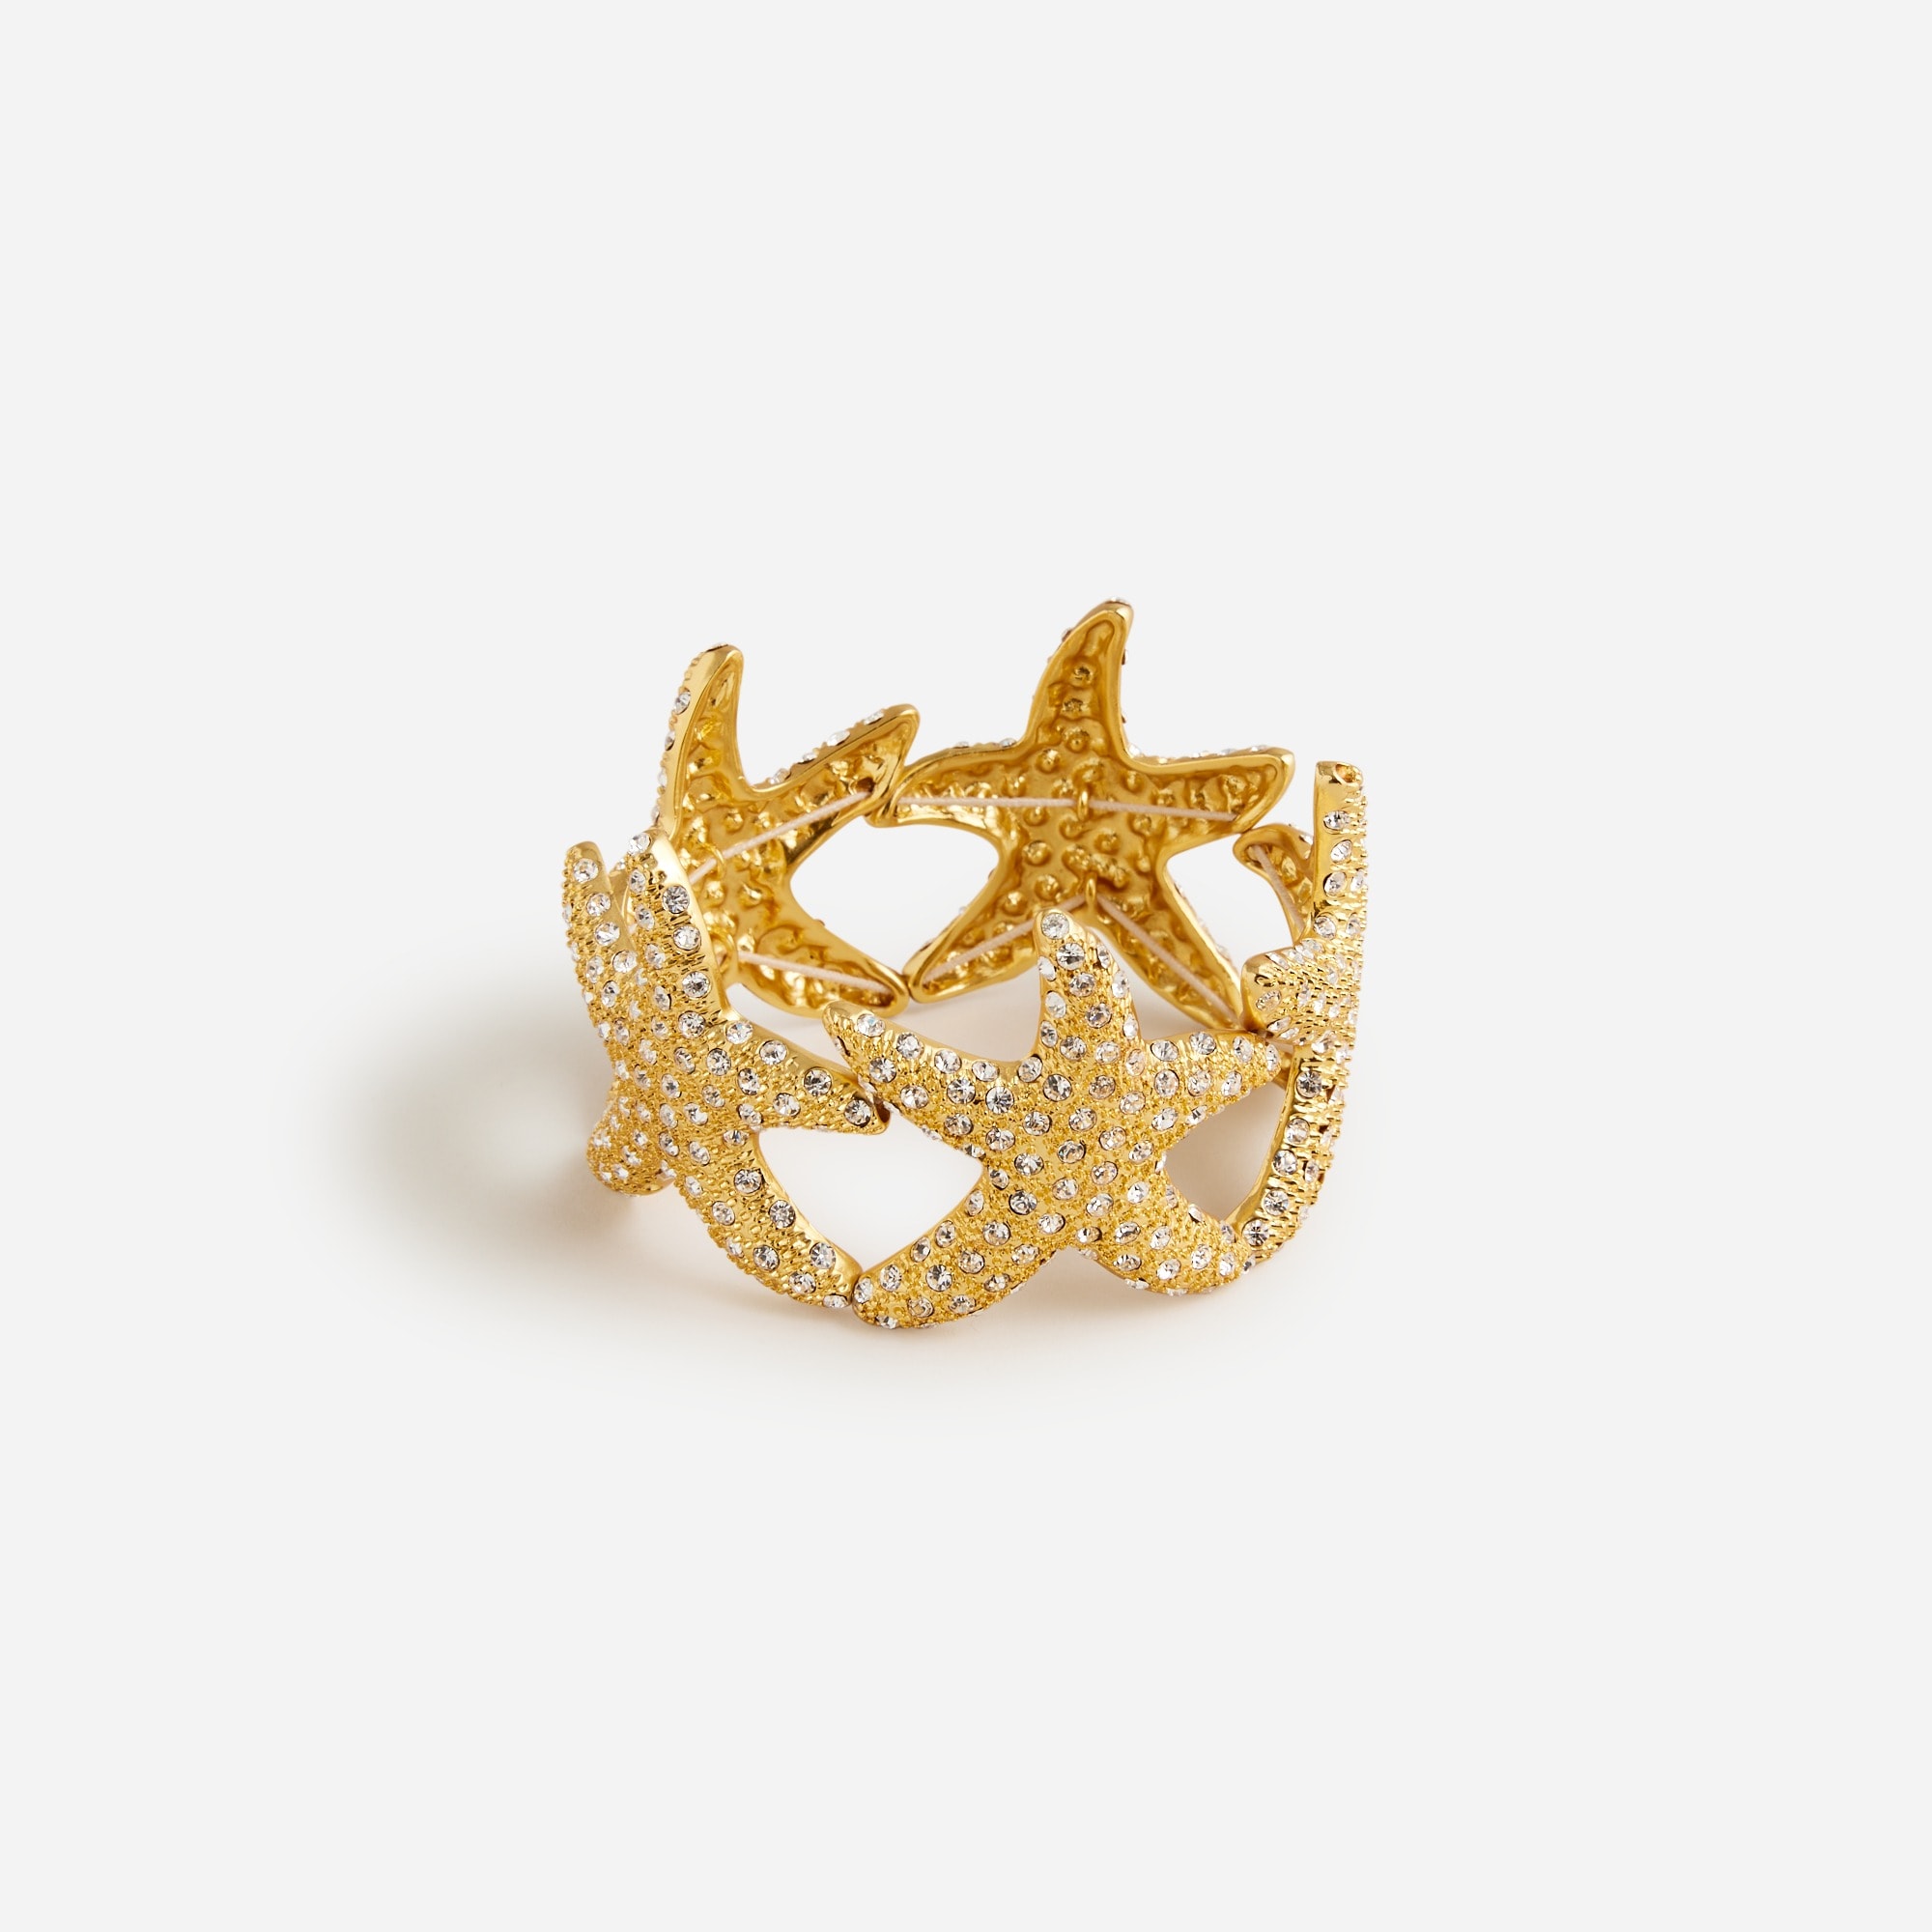  Starfish cuff bracelet with pav&eacute; crystals